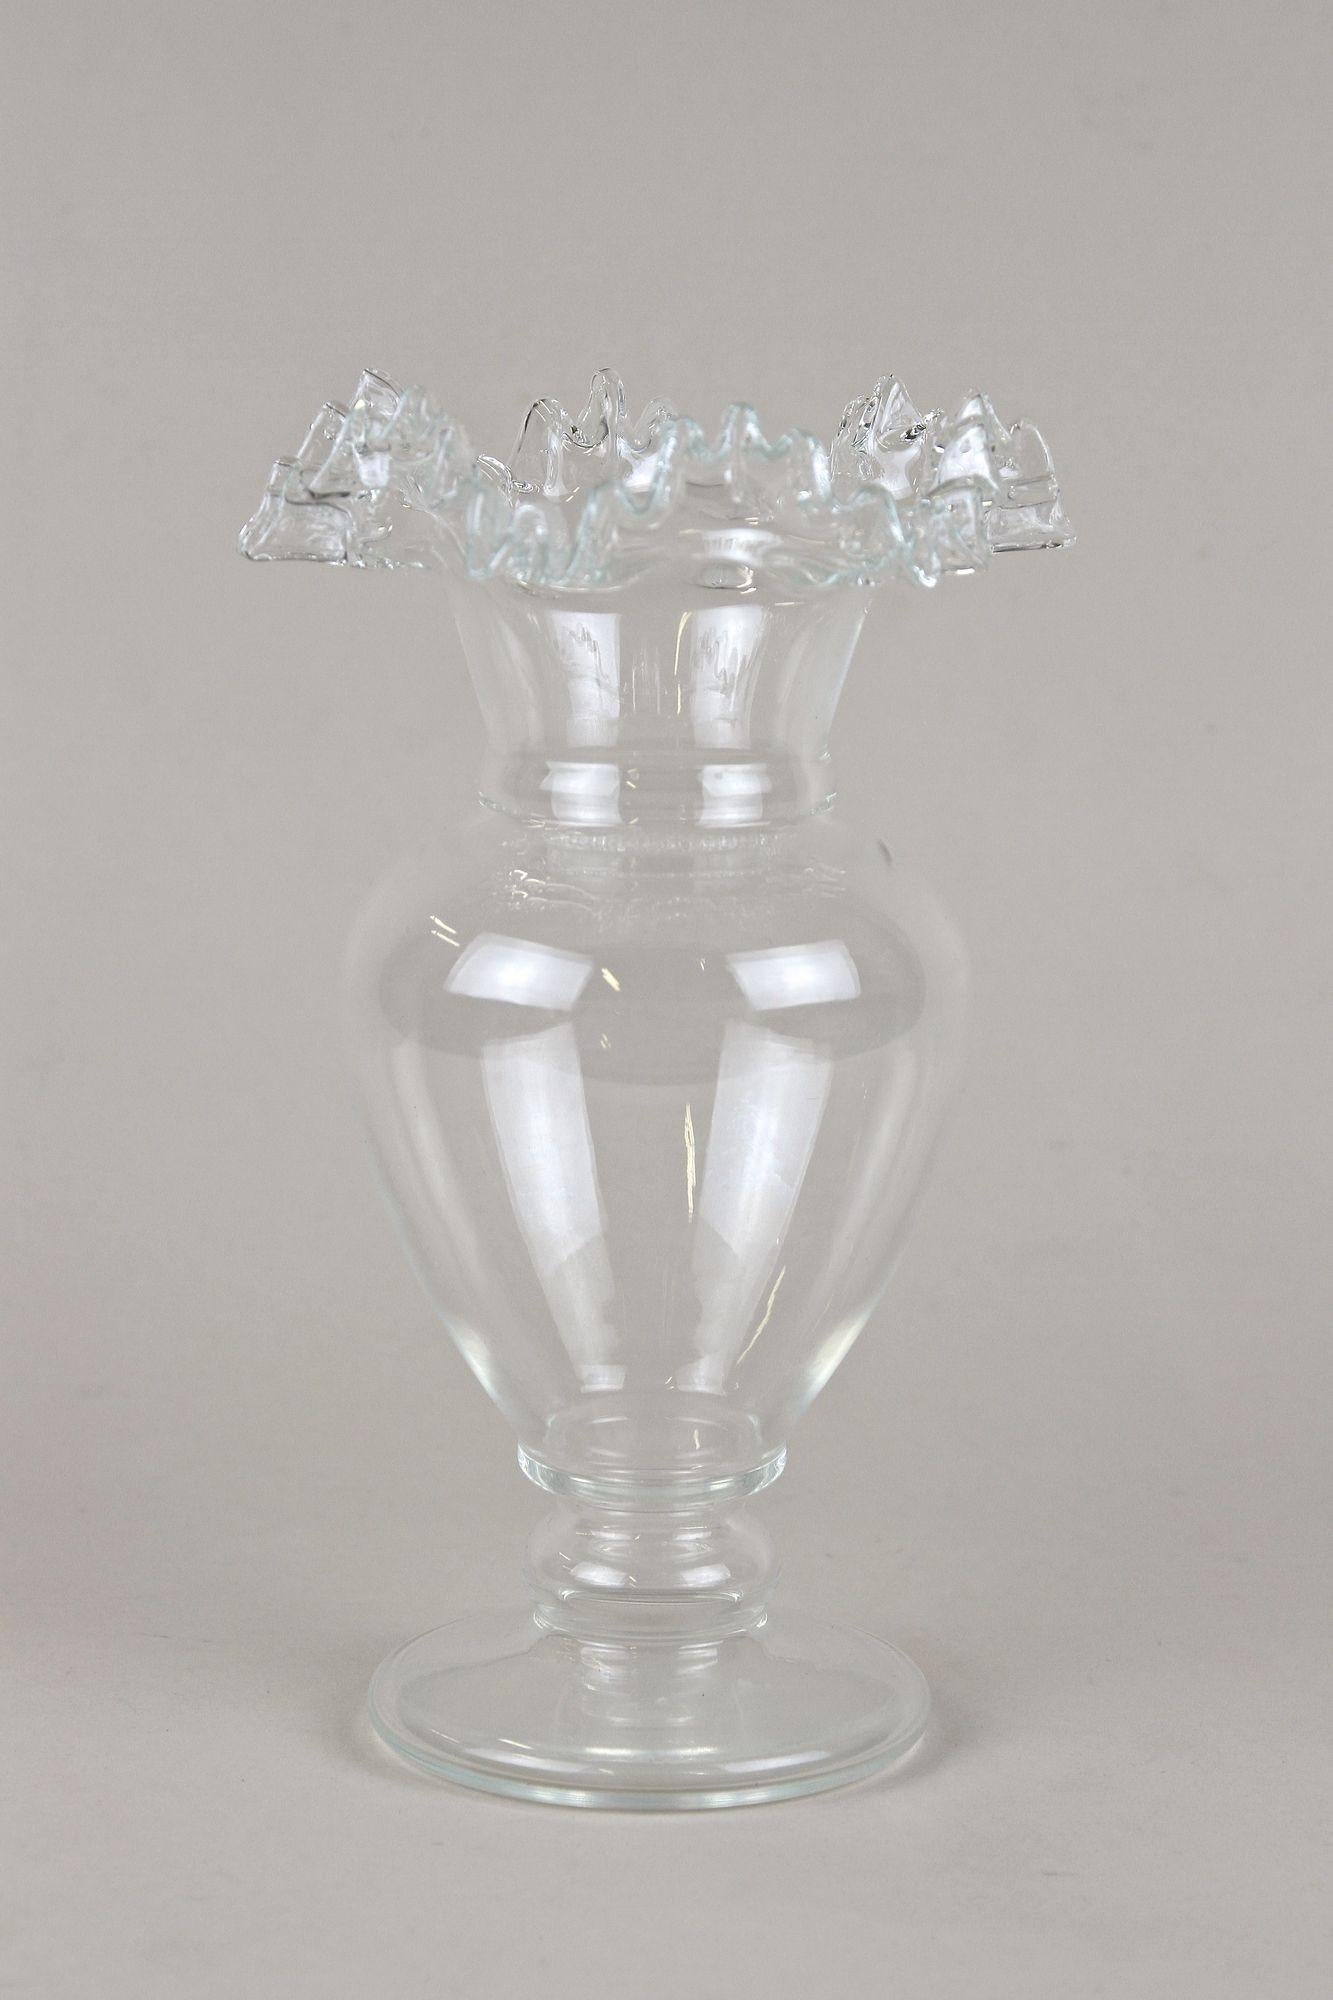 Extraordinary glass vase with frilly edge coming from the famous Art Nouveau period in Austria around 1900. The mouthblown clear glass body impresses with a beautiful bulby design. A great highlight on this Art Nouveau vase is the amazing looking,